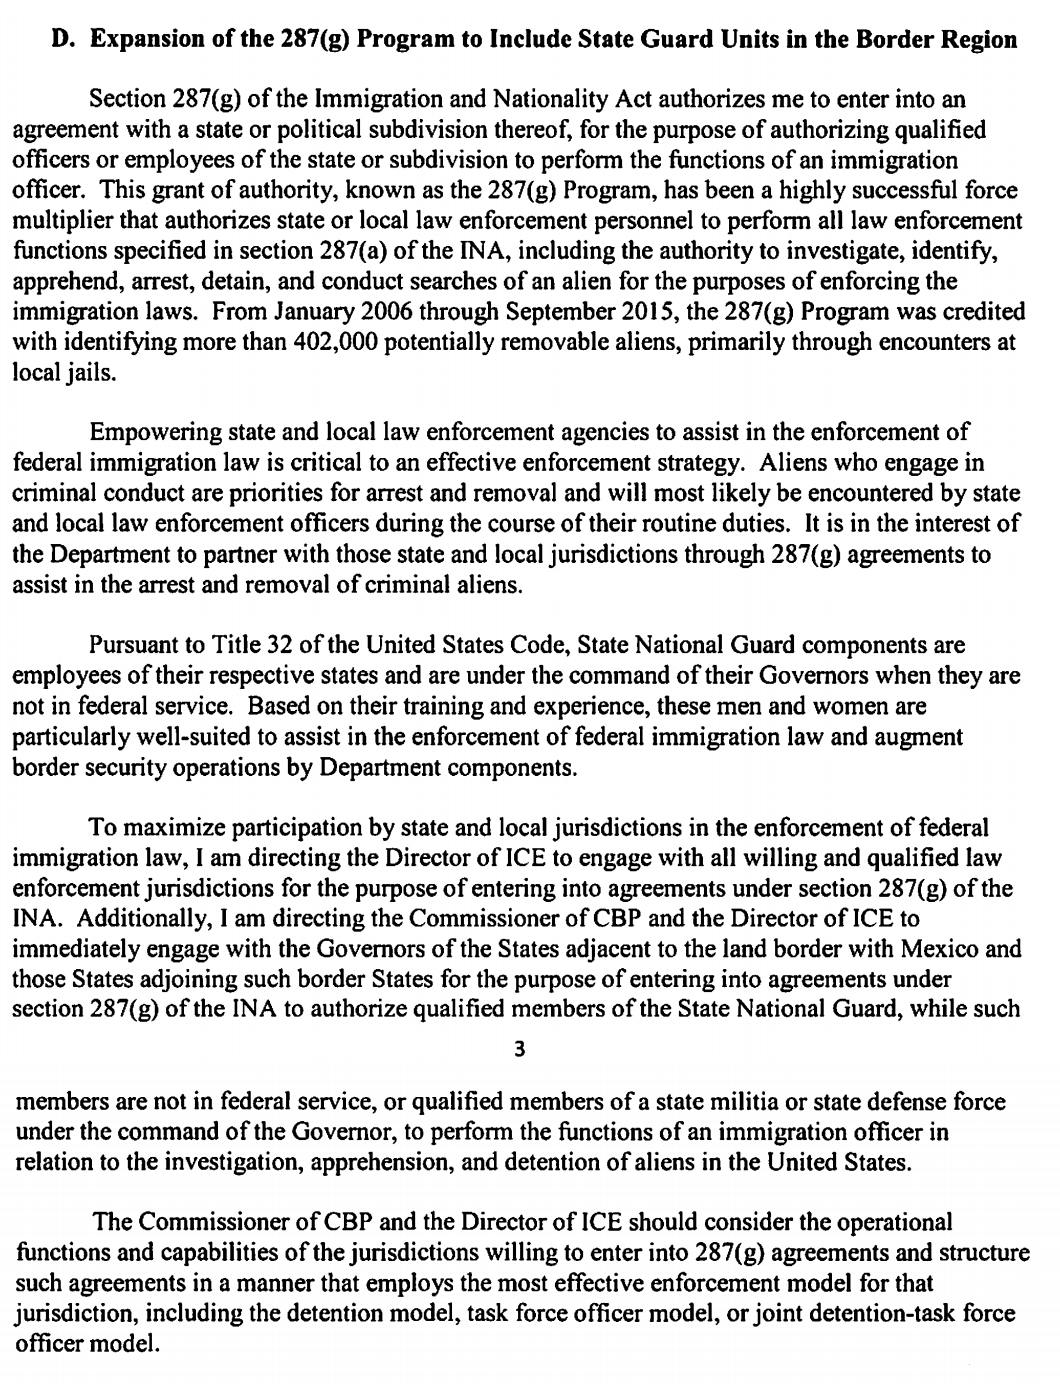 Portion of the draft memo that pertains to the National Guard deputization